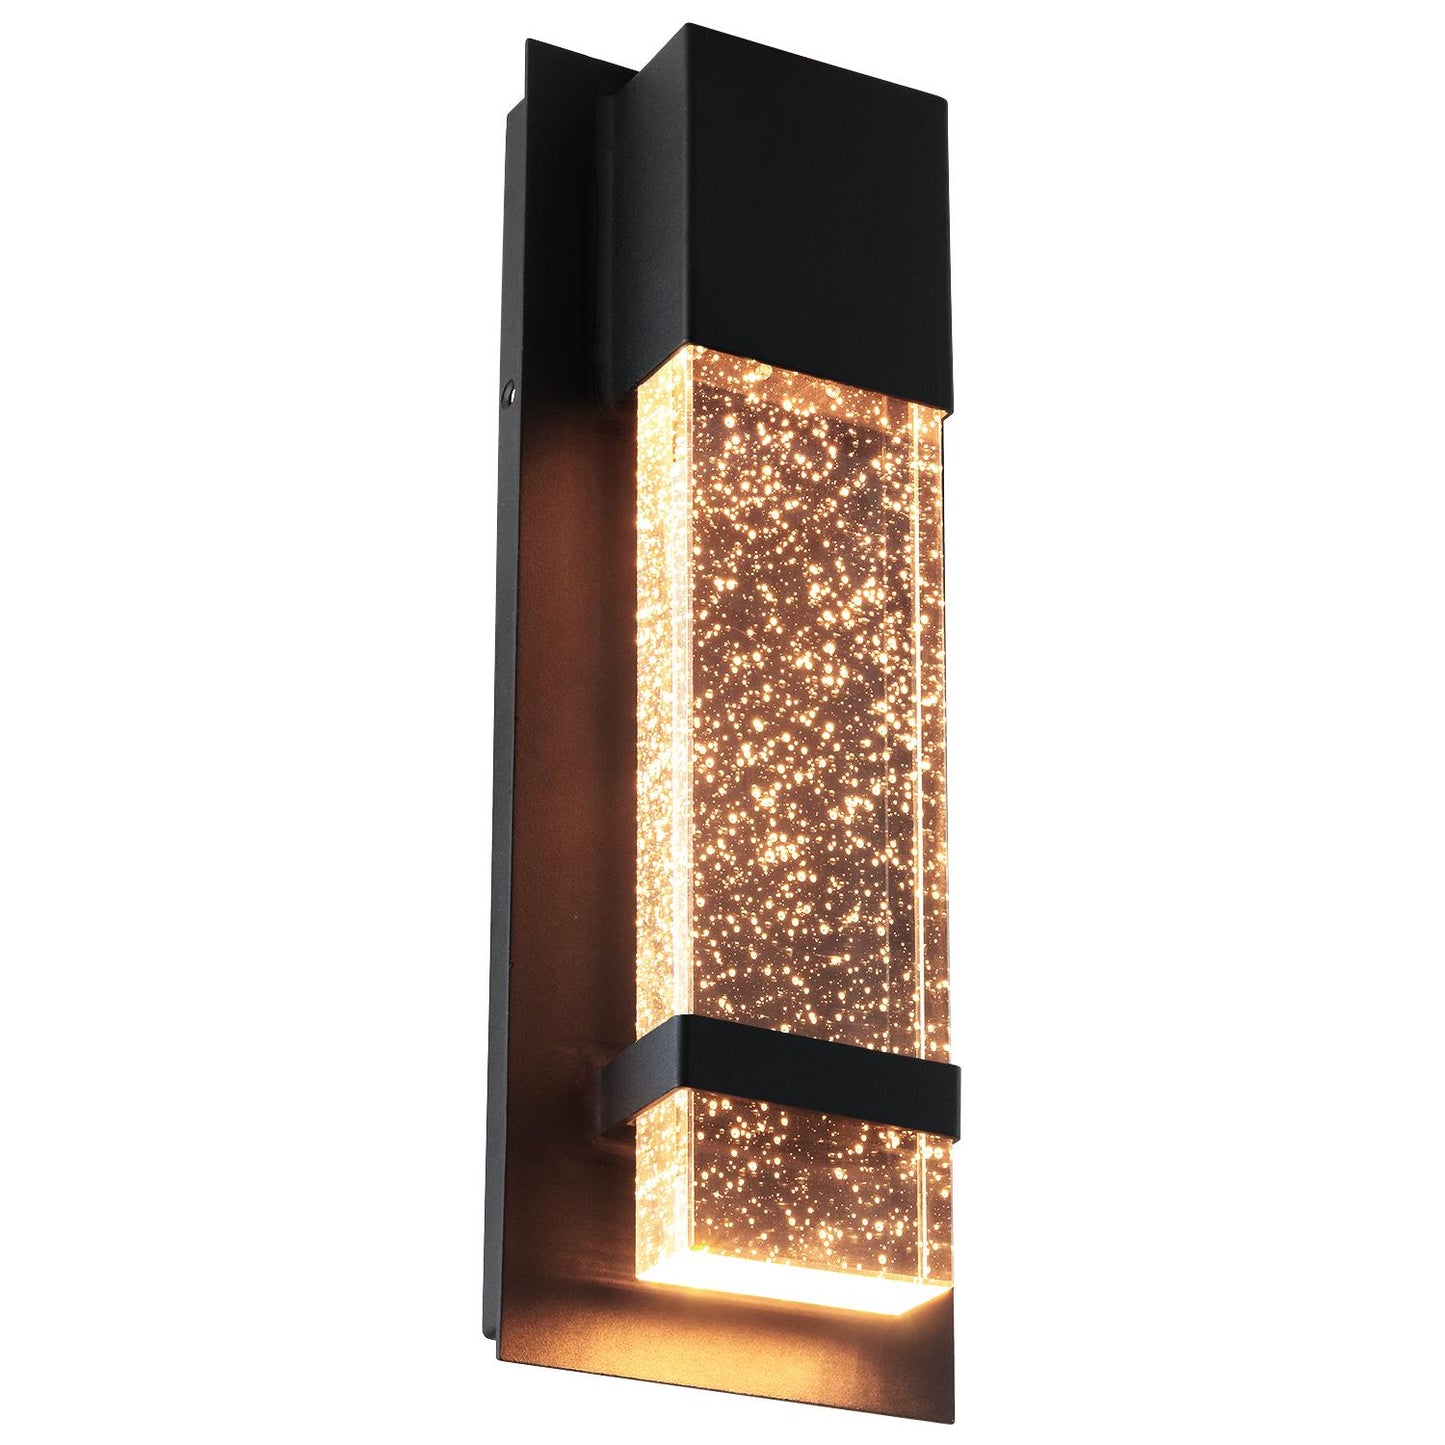 Sunlite LED Wall Sconce, Black Metal Frame with Raindrop Effect Glass Panel,  4.75" Wide, 5000K Super White, Indoor & Outdoor, ADA Compliant